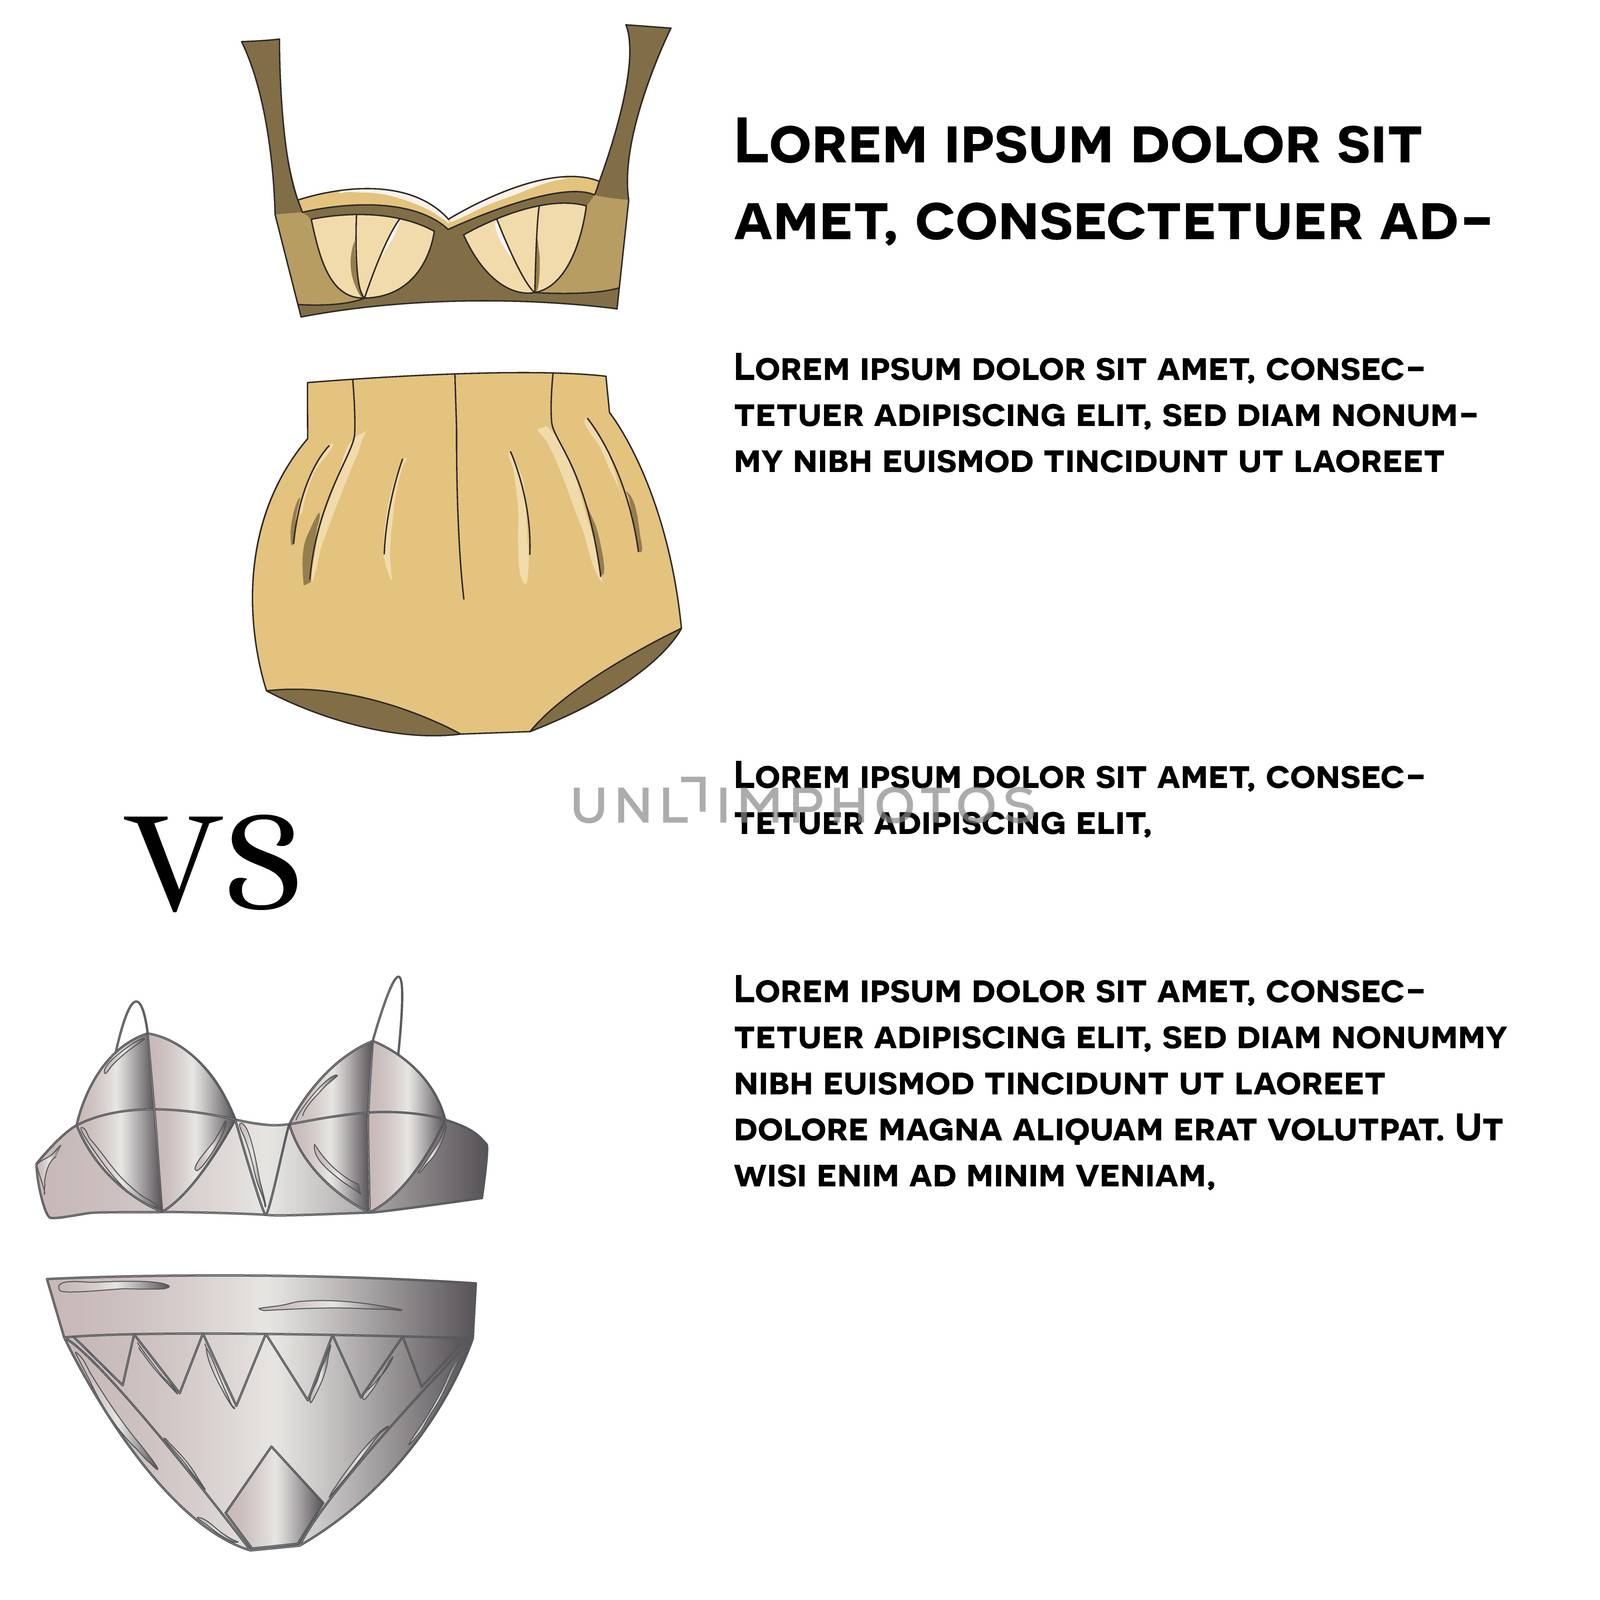 Lingerie collection blog post. Lace underwear set vs cotton set isolated on white background. Vector illustration.